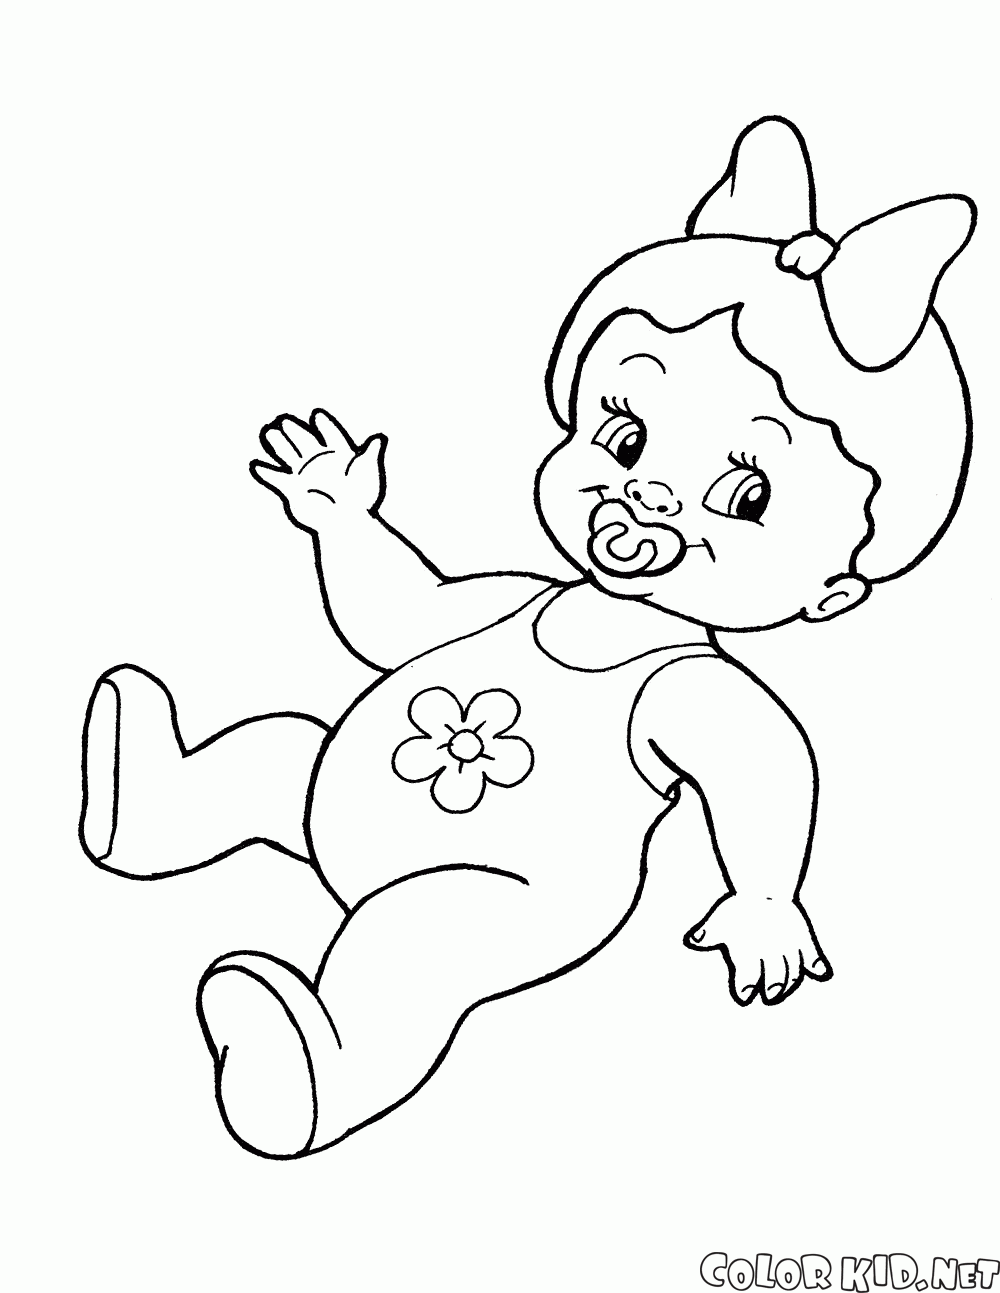 young children coloring pages - photo #41